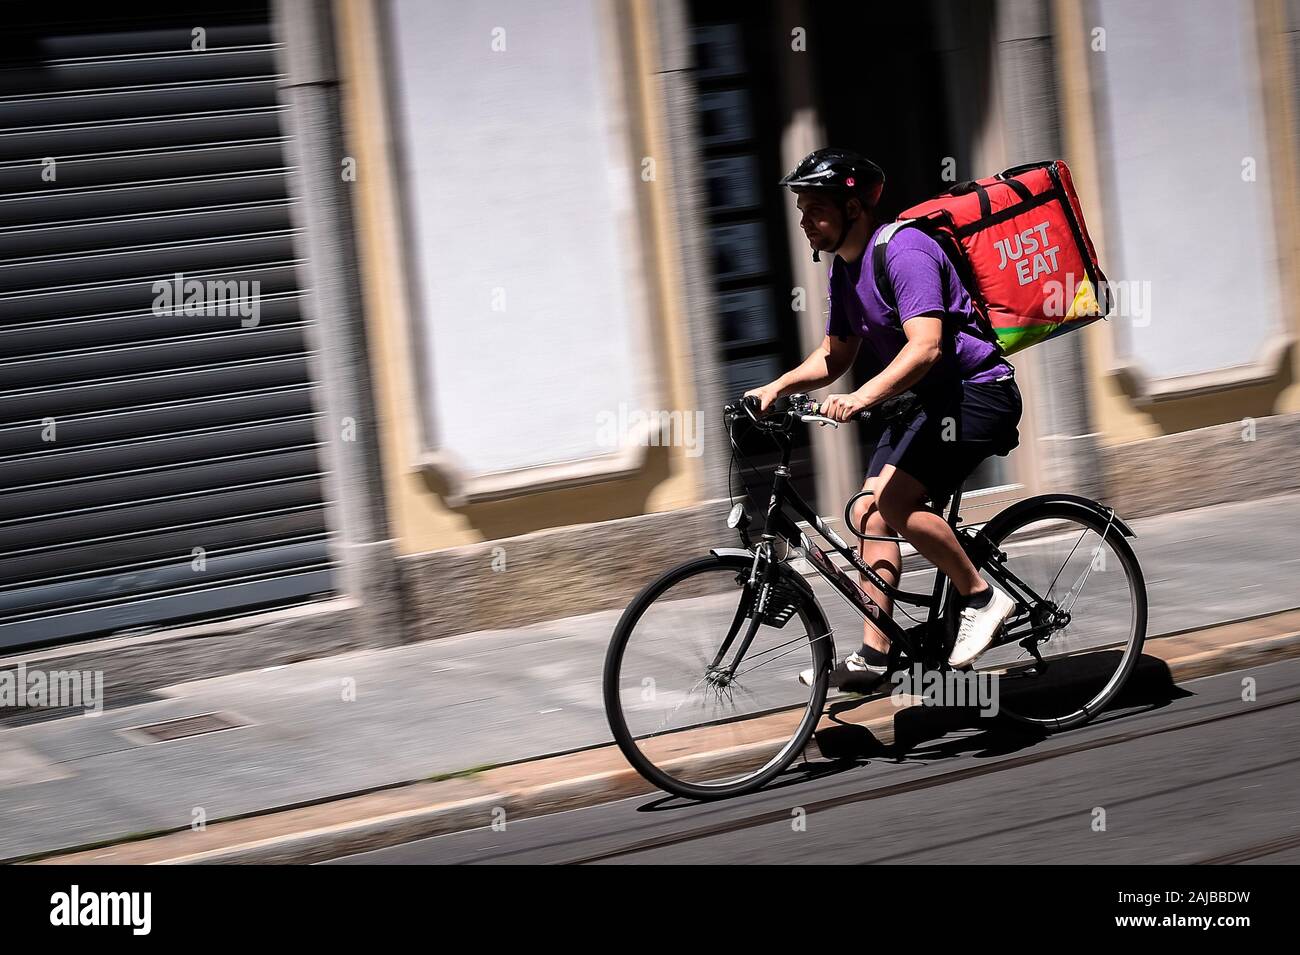 Turin, Italy - 13 June, 2019: A Just Eat courier rides during his work. Just Eat is a online food  delivery app (as Glovo, Uber Eats and Foodora) that use food riders as independent contractors. Credit: Nicolò Campo/Alamy Live News Stock Photo